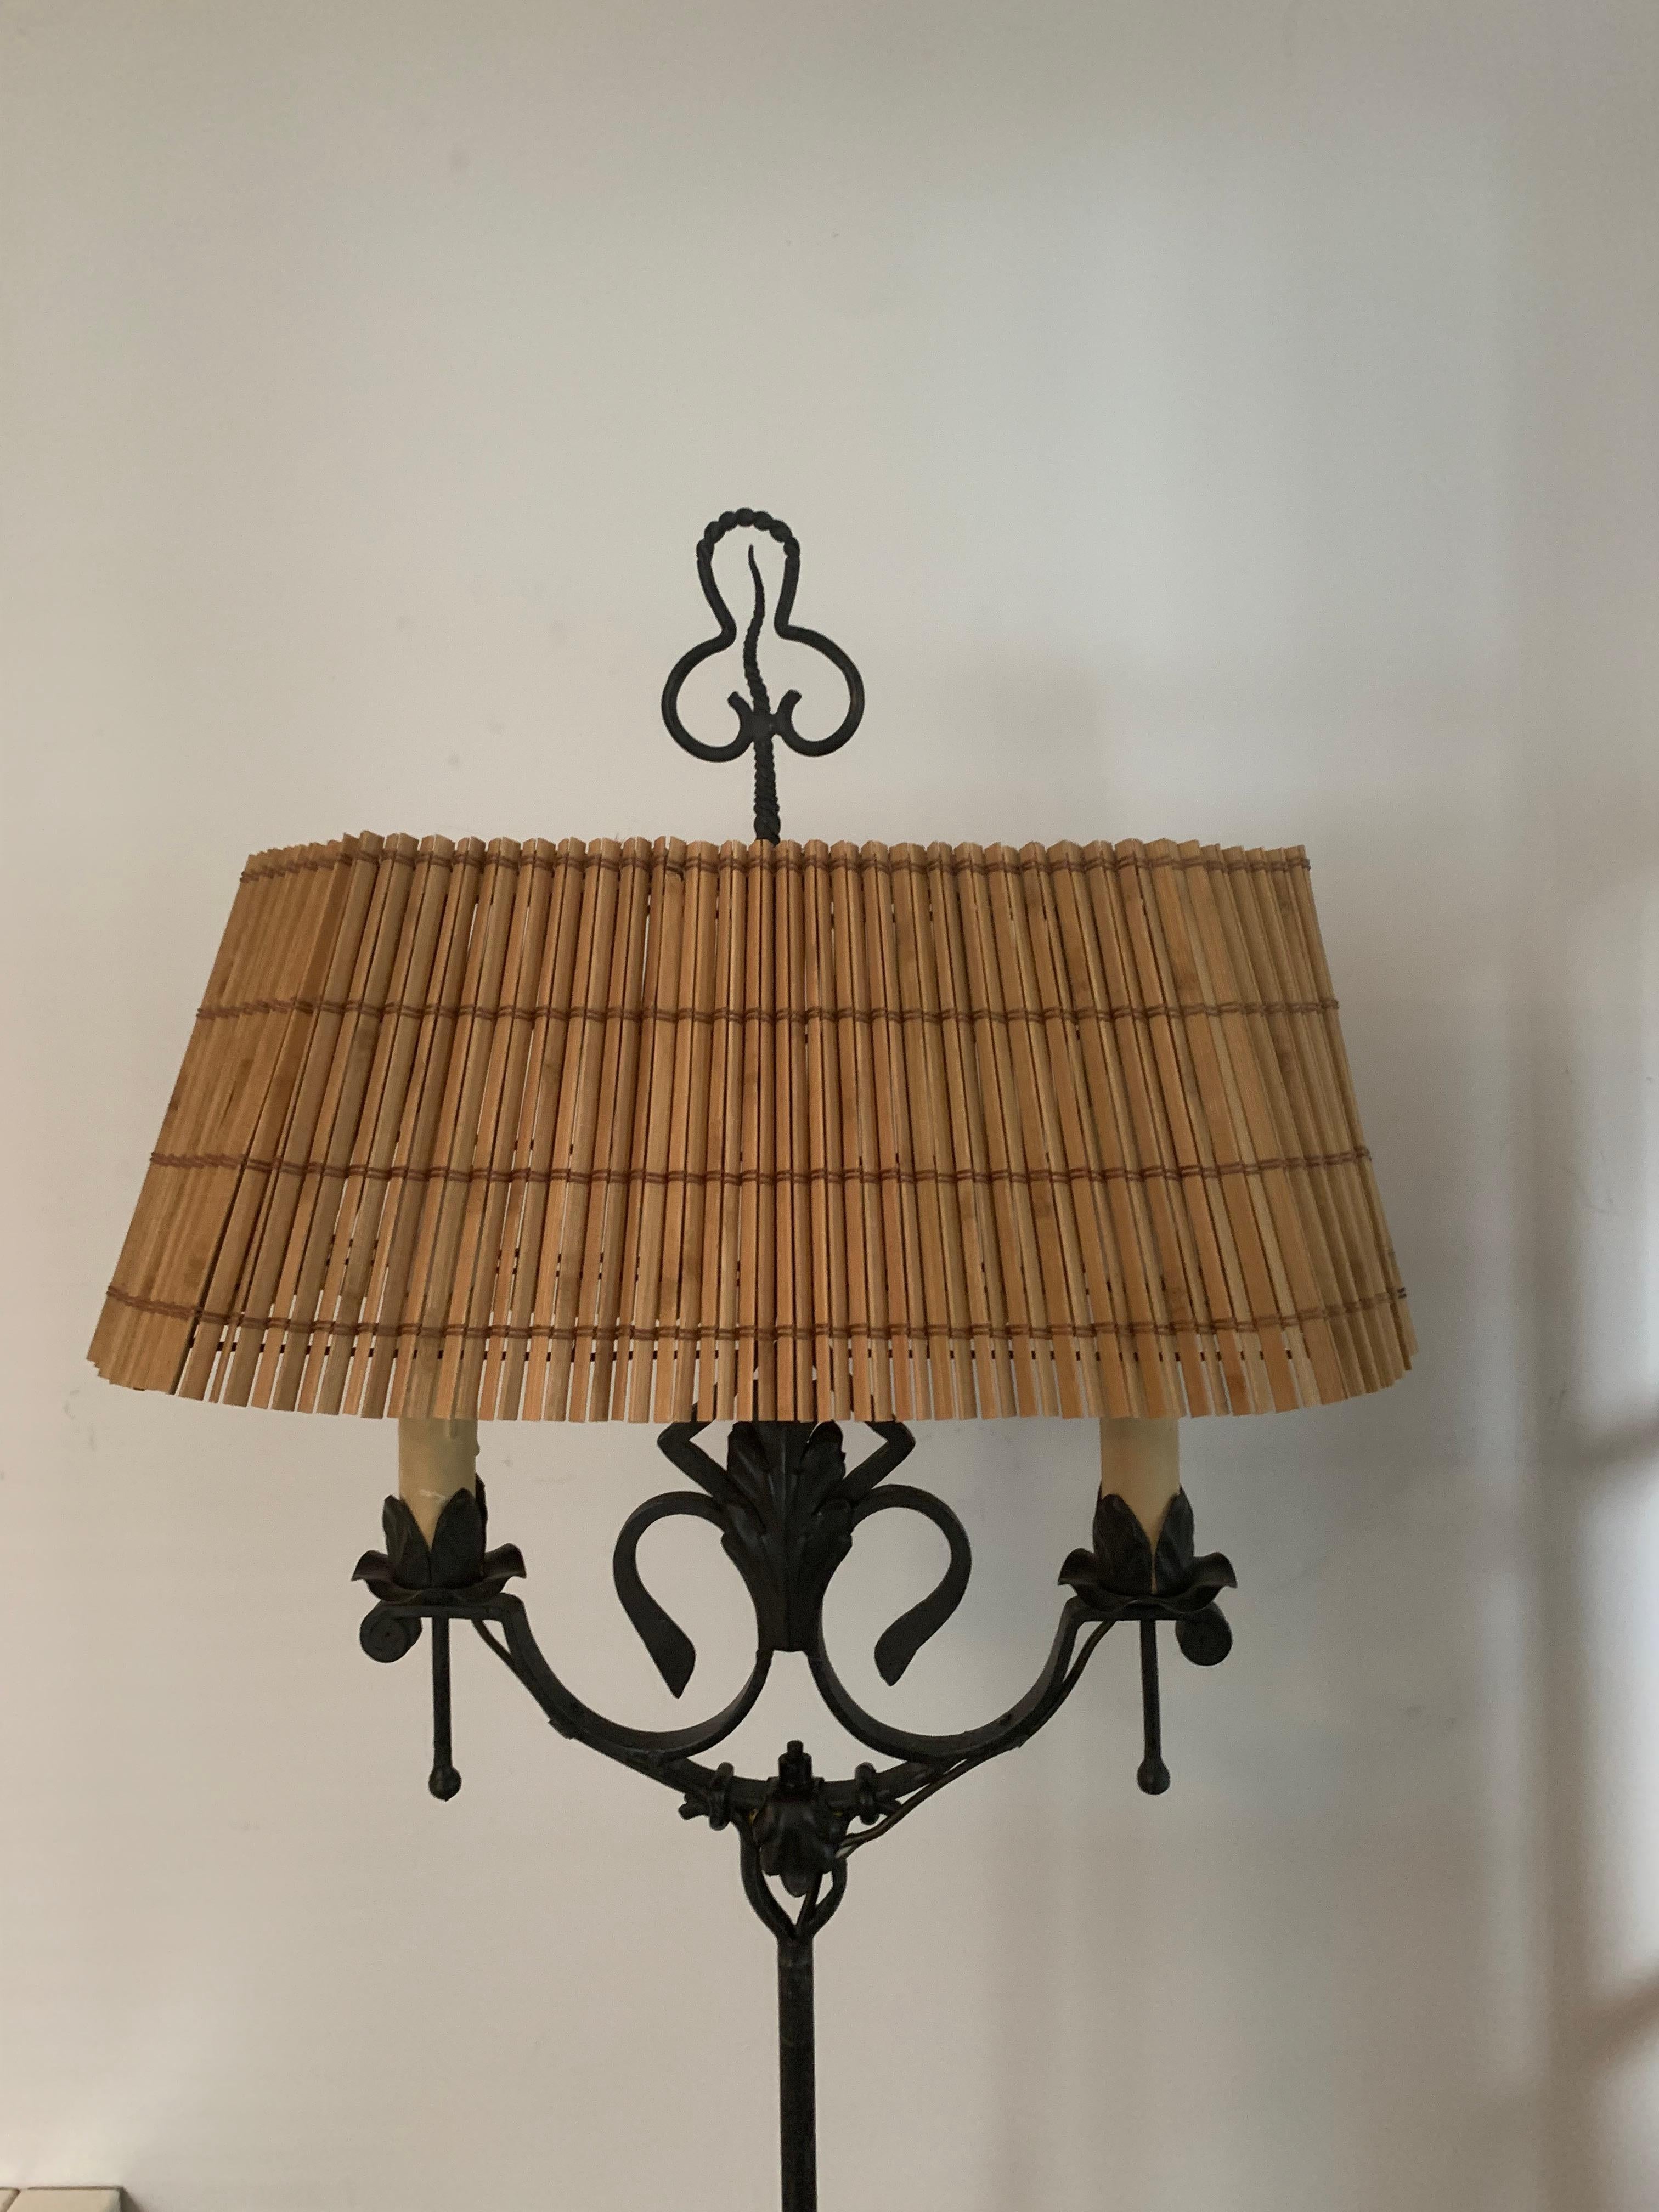 A wonderful lamp handcrafted by Finnish Art forge Antti Hakkarainen, the lamp has two light points and a wonderful wooden shade.